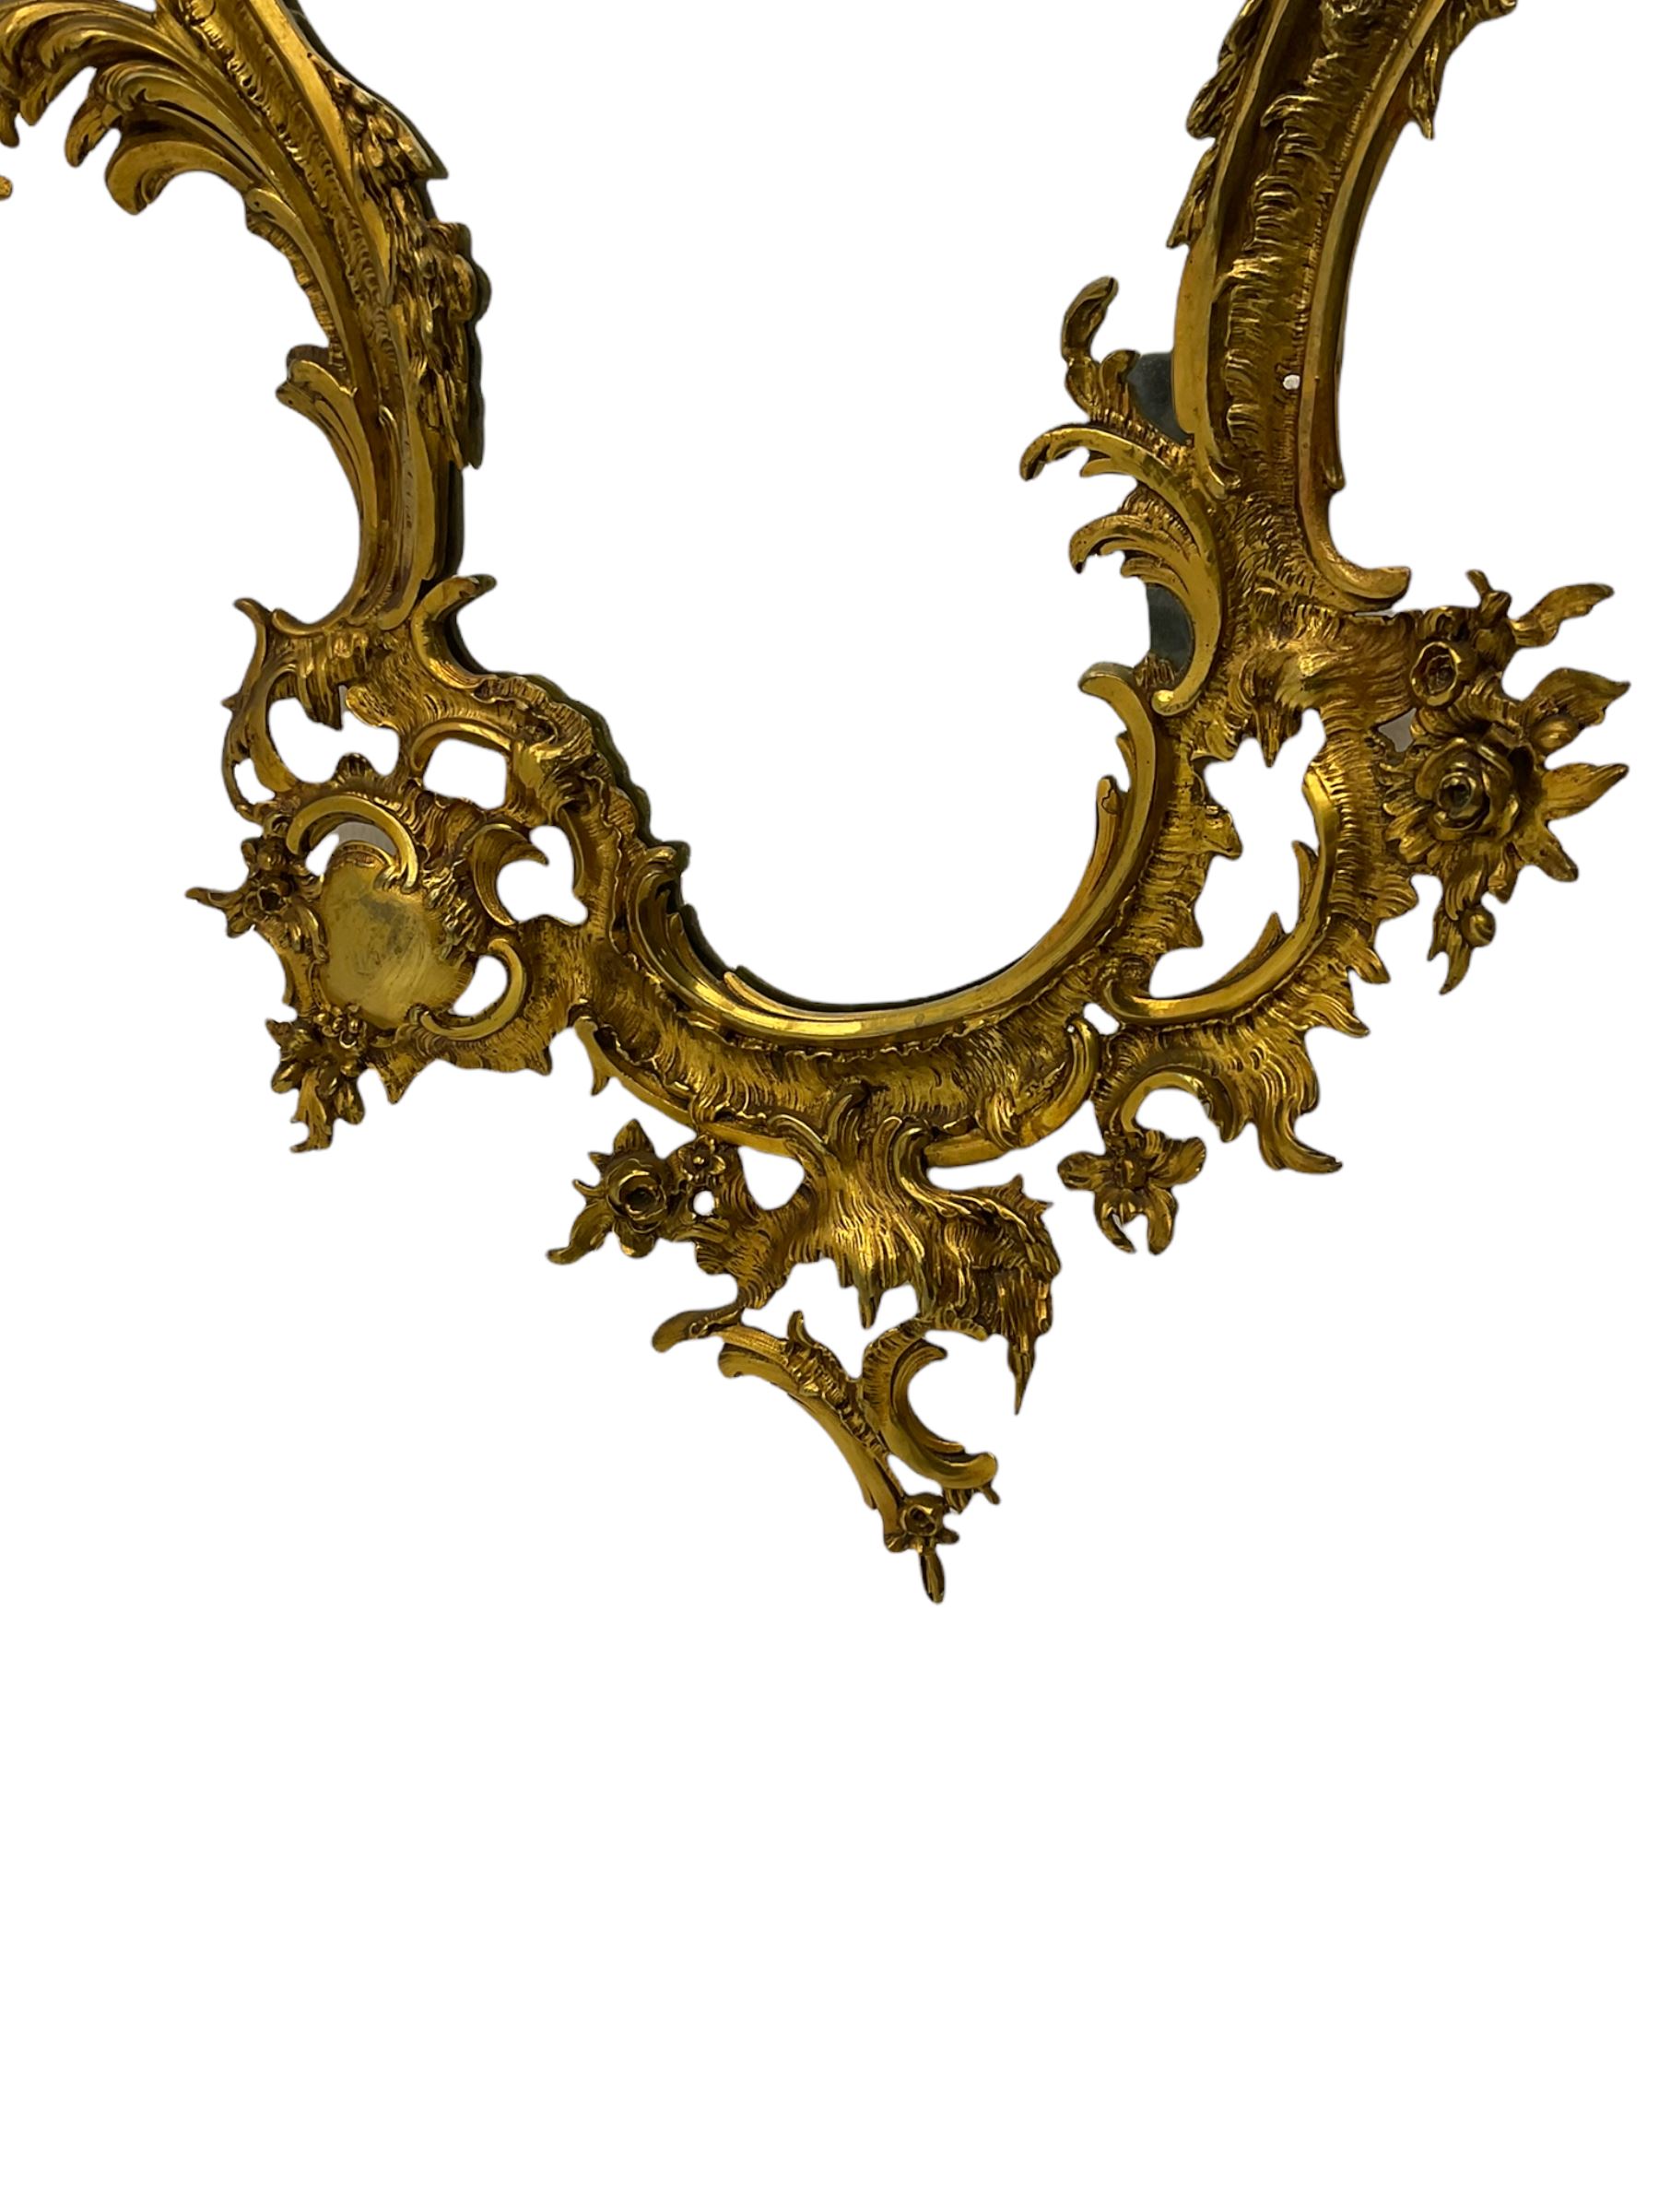 Rococo style ornate cast brass wall mirror - Image 3 of 5